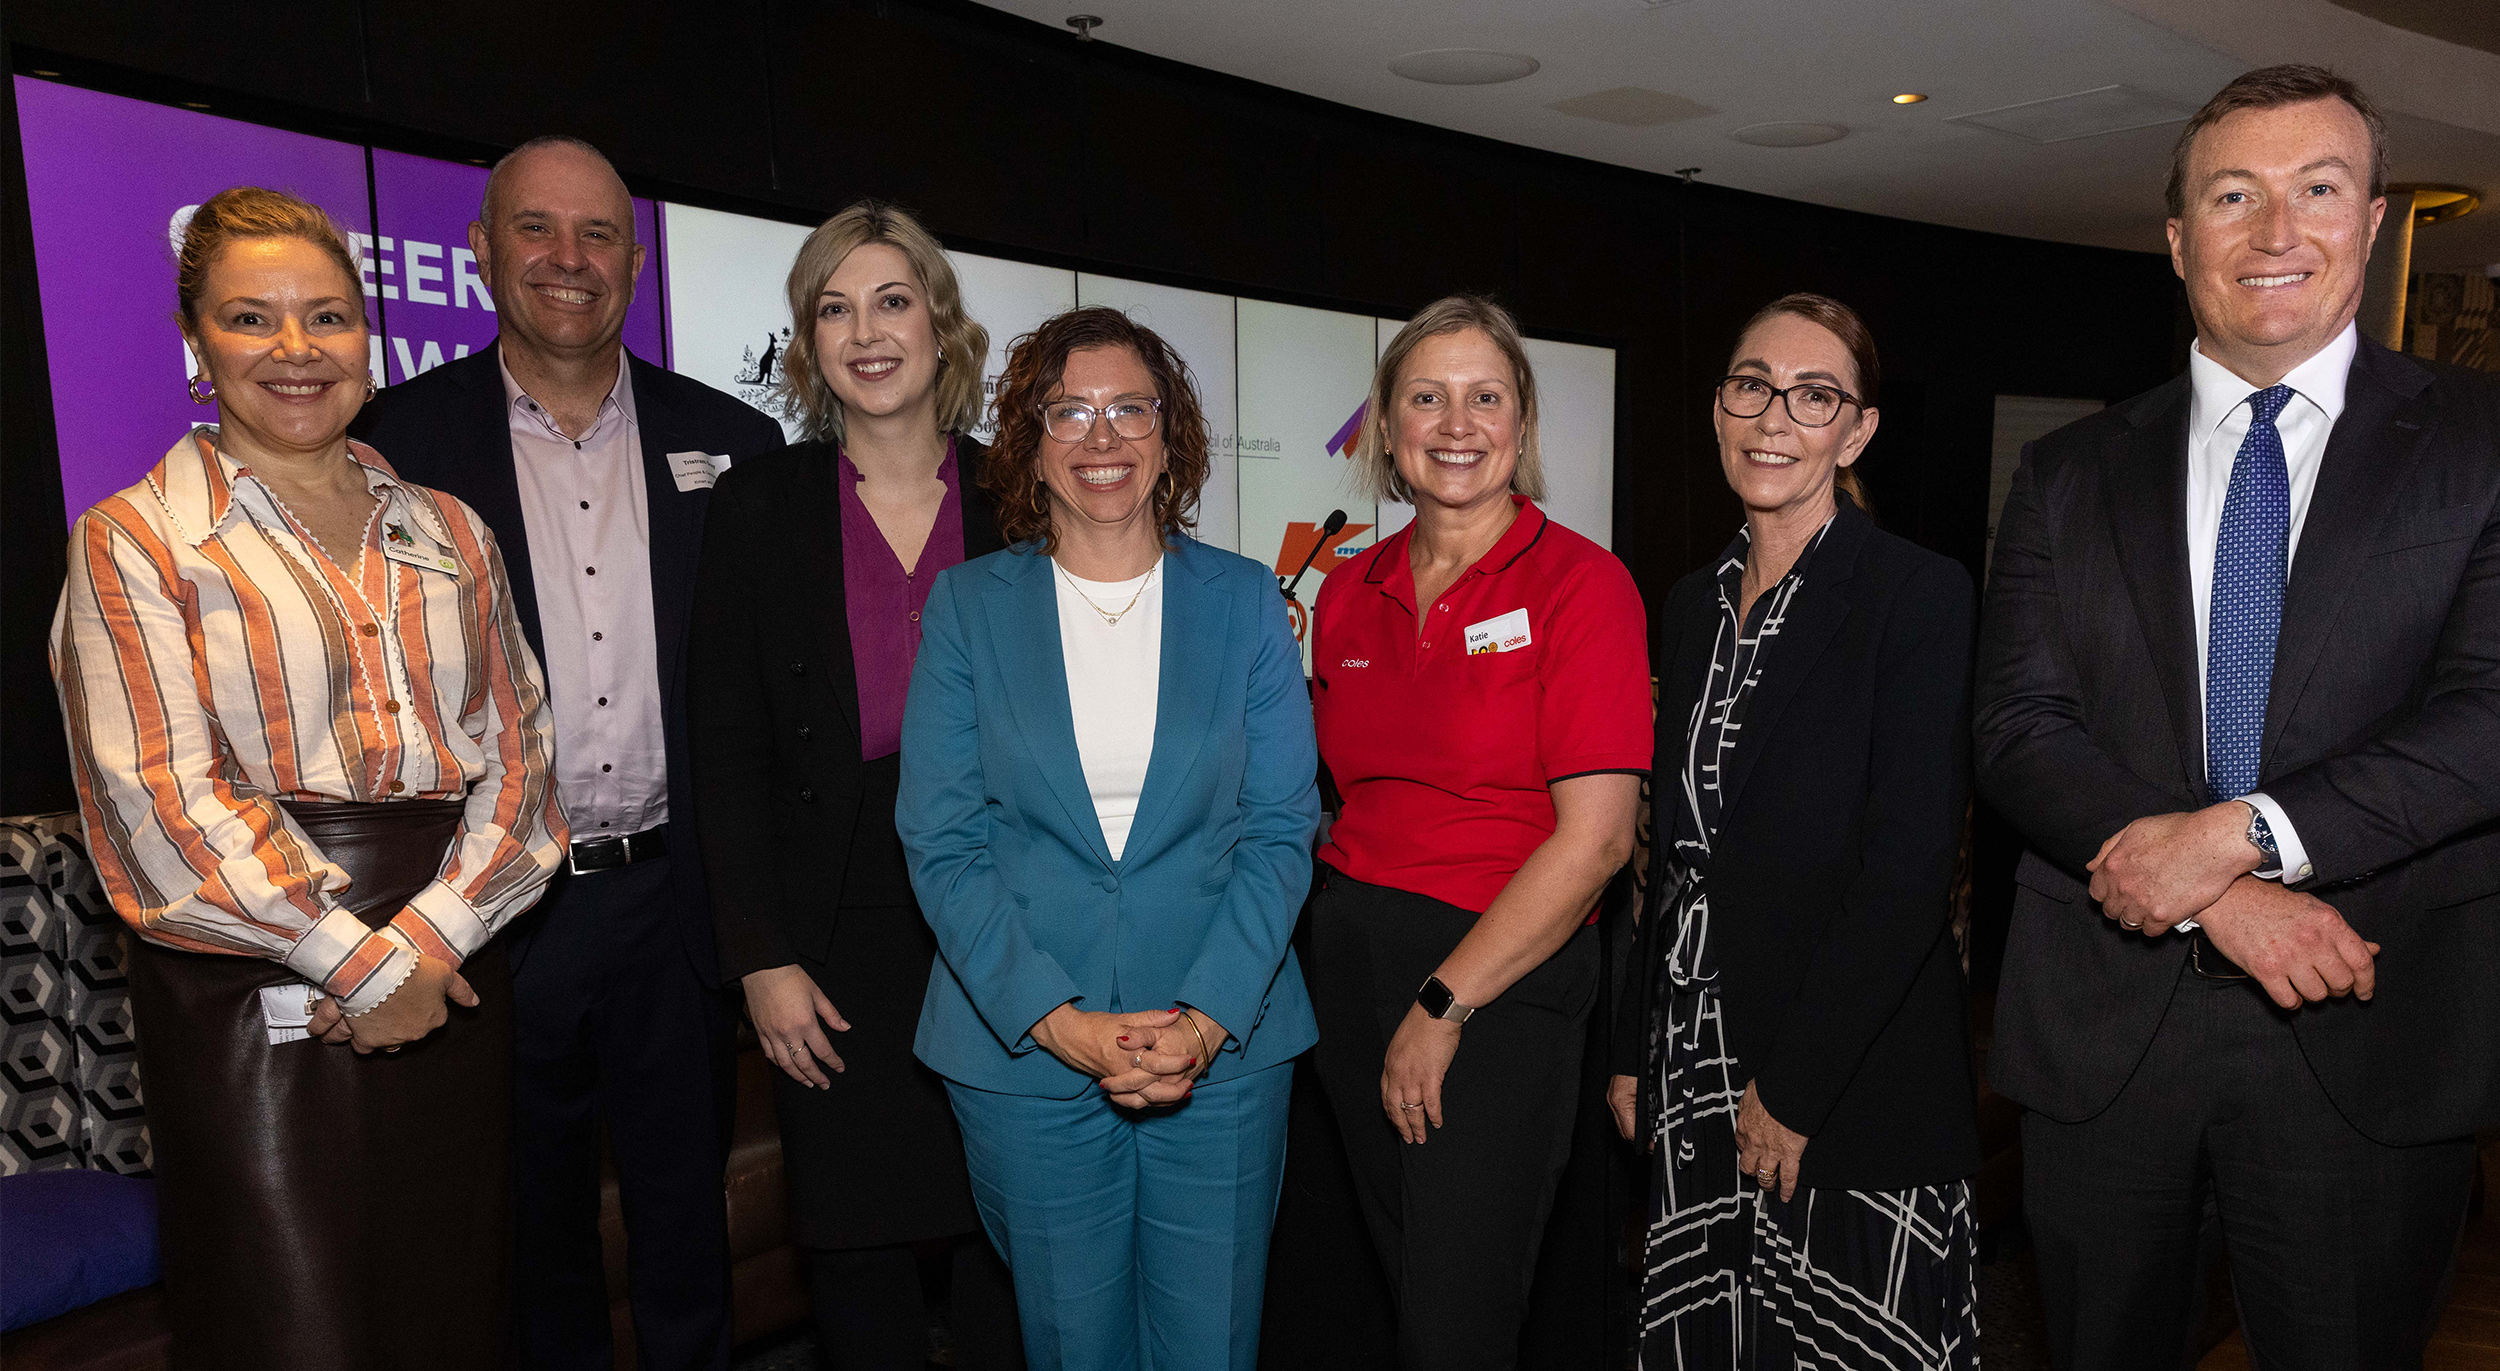 At the launch of the Career Pathways Pilot at Kmart Broadway:Left to right: Catherine Hunter, Woolworths; Tristram Gray, Kmart & Target Australia; Amber O’Shea, Australian Disability Network; Minister Amanda Rishworth; Katie Wyatt, Coles; Suzy Hudson Tasker, Compass and Bran Black, Business Council of Australia.